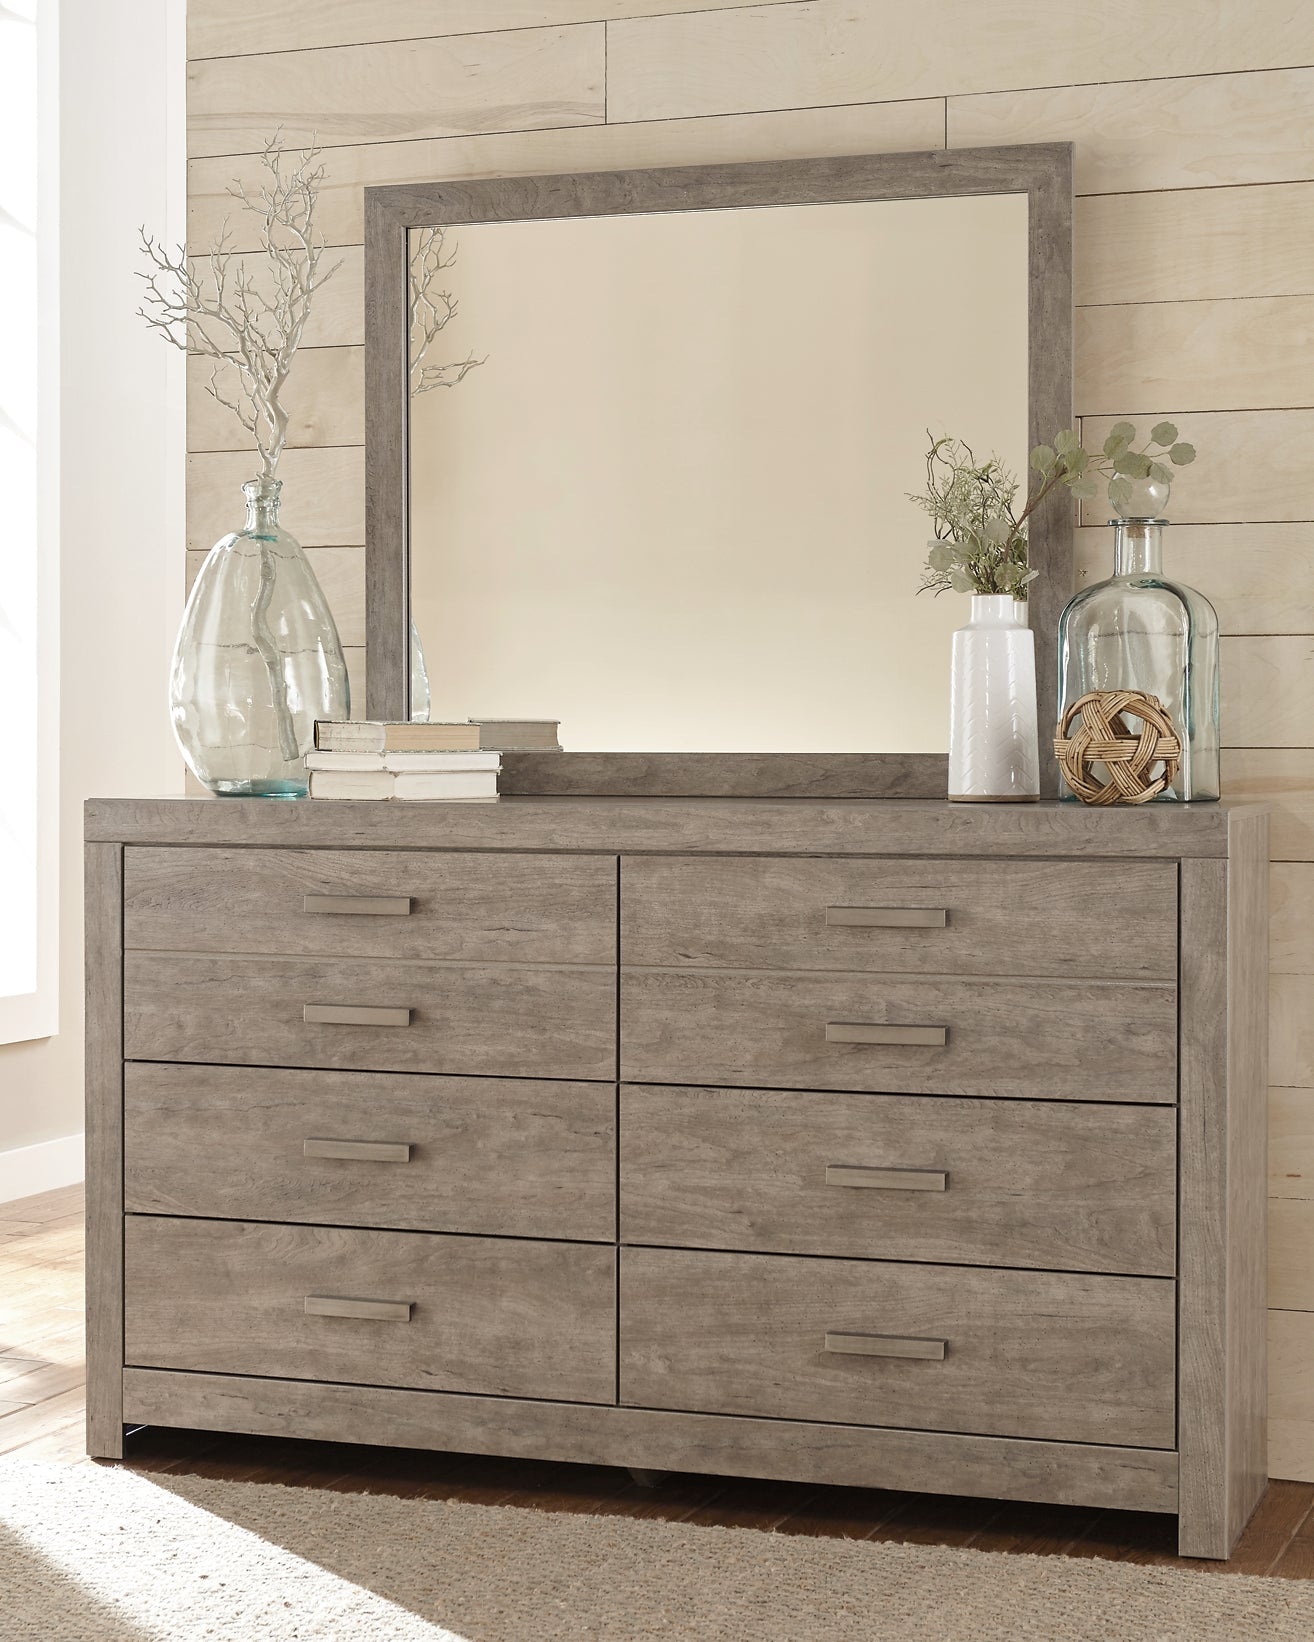 Culverbach Queen Panel Bed with Mirrored Dresser, Chest and Nightstand at Walker Mattress and Furniture Locations in Cedar Park and Belton TX.